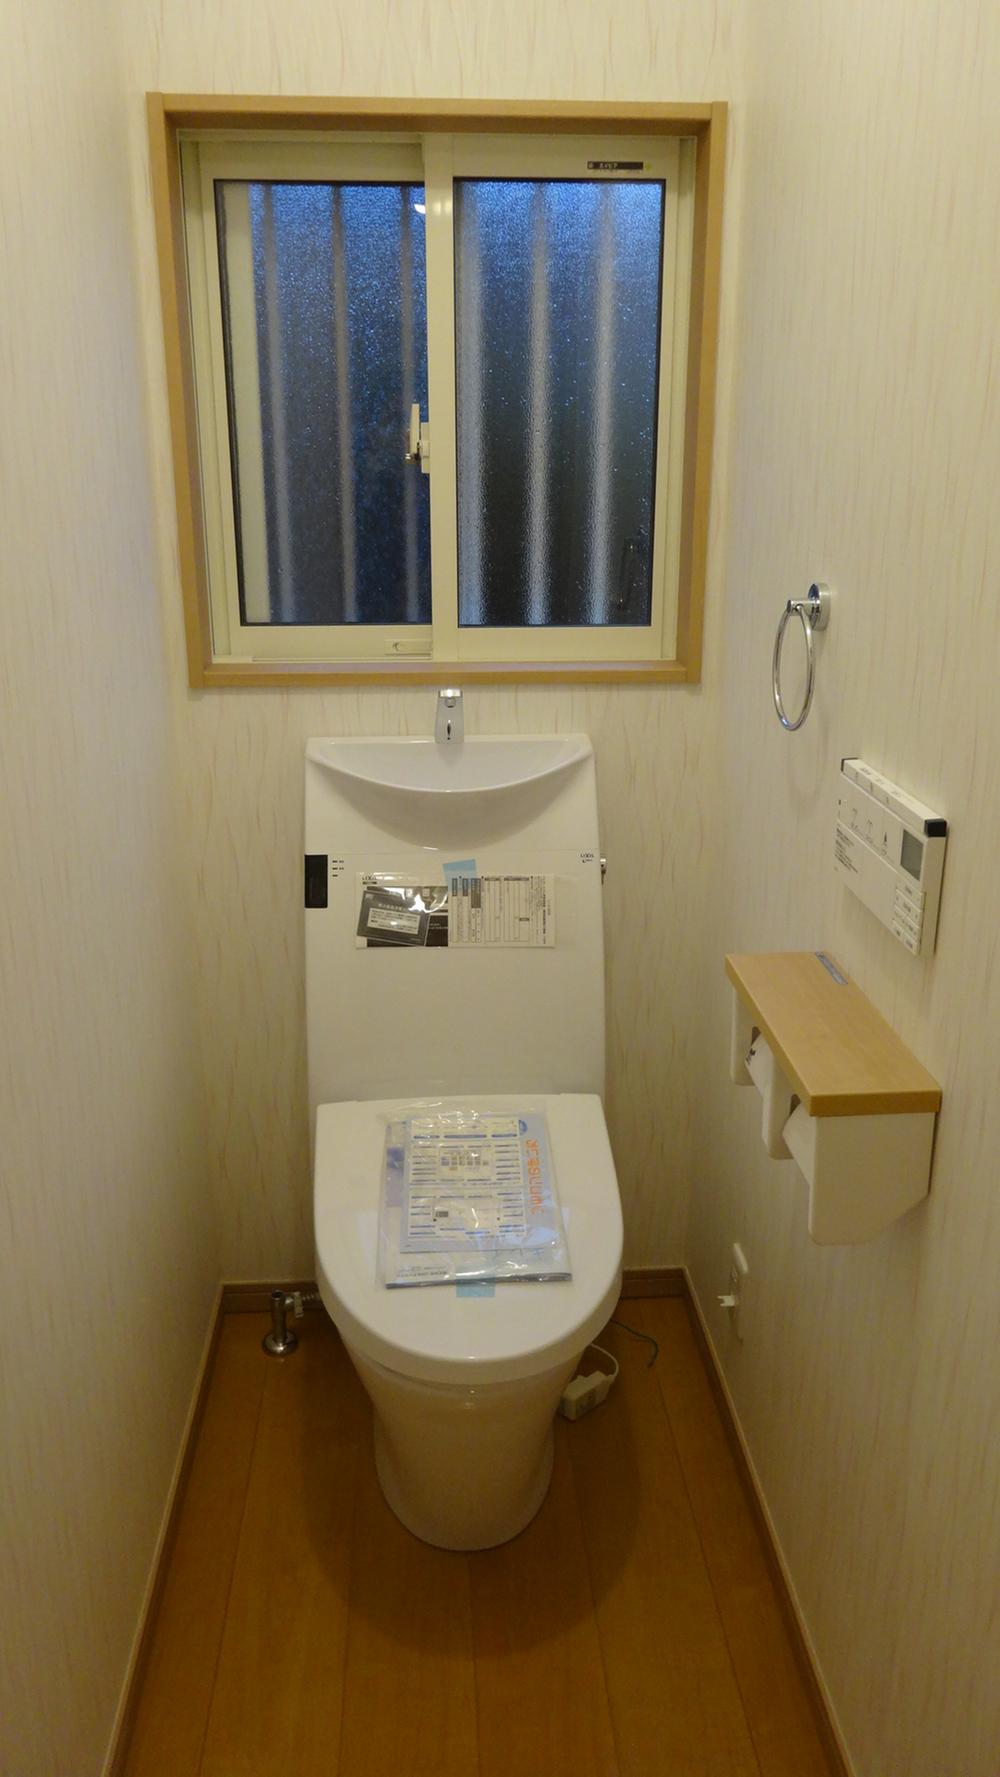 Toilet. Automatic opening and closing function with toilet (1F)